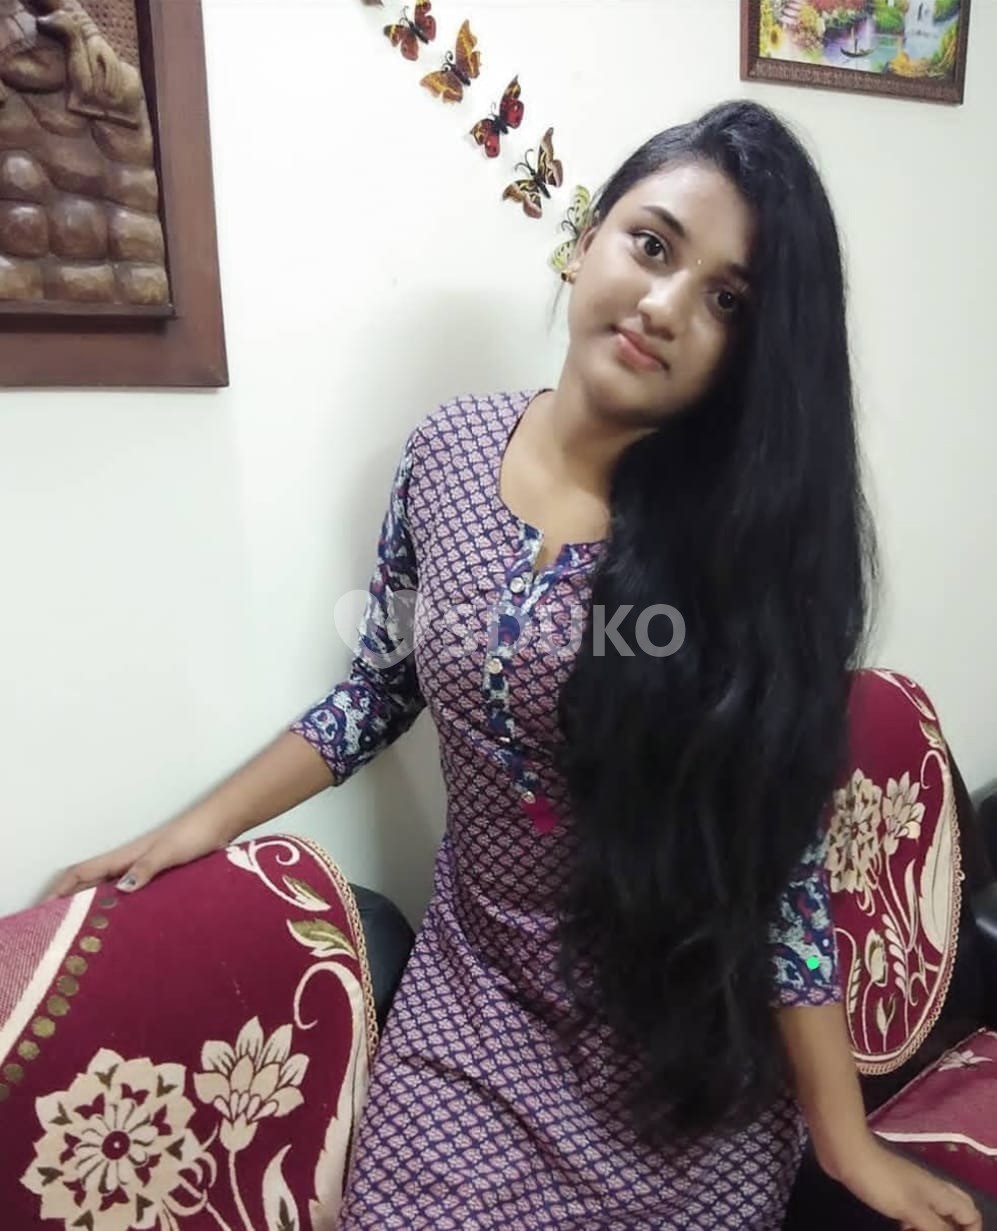 Koramangala ....low price 🥰 100% SAFE AND SECURE TODAY LOW PRICE UNLIMITED ENJOY HOT COLLEGE GIRL HOUSEWIFE AUNTIES A